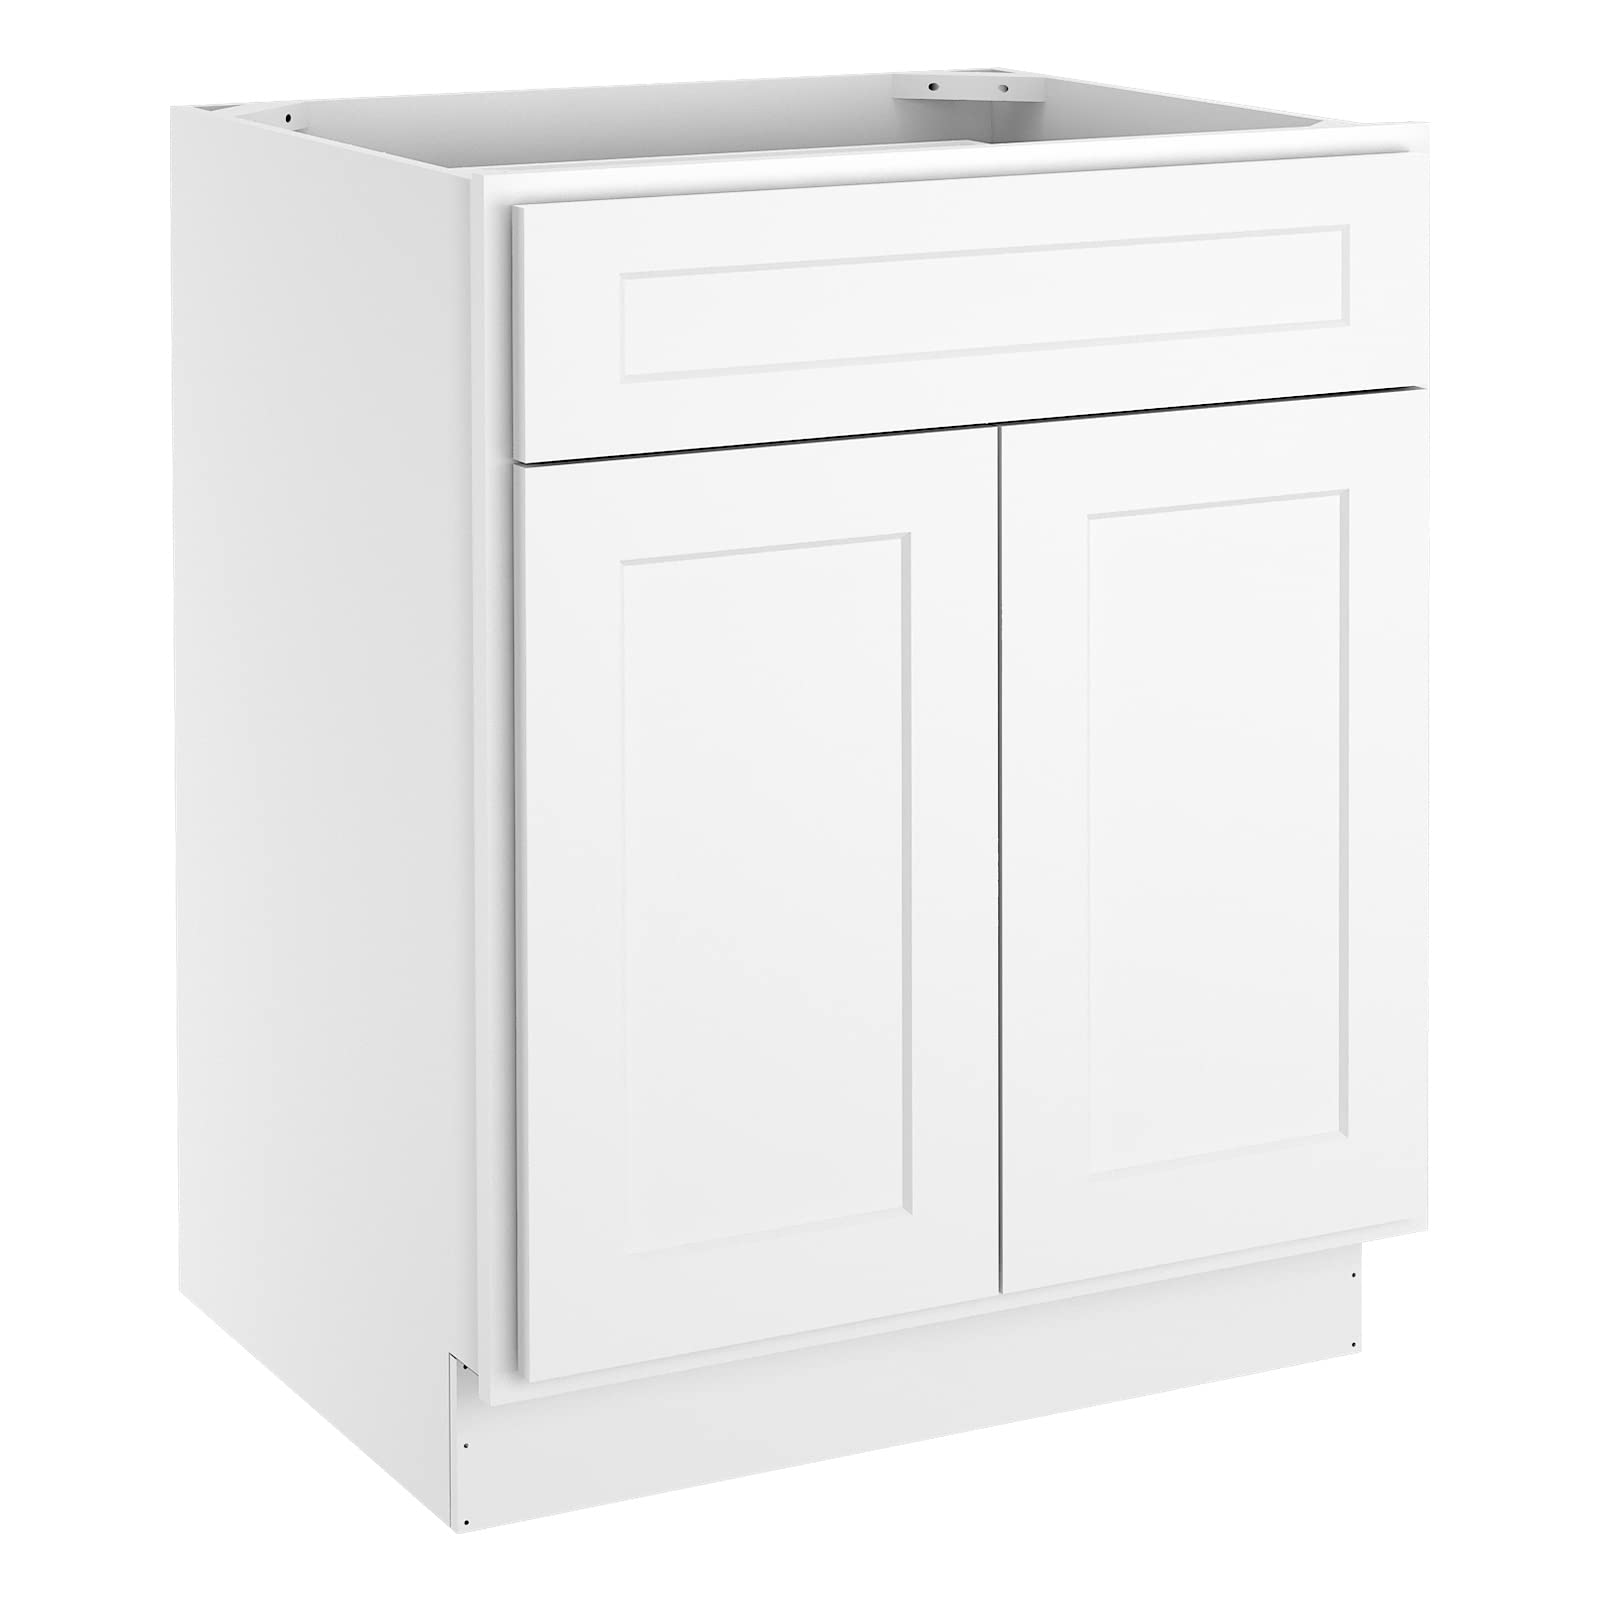 ROOMTEC Kitchen Base Cabinets, Sideboard Storage Cabinet, Entryway Cabinet with Soft Closing Doors 27" W X 24" D X 34-1/2"H